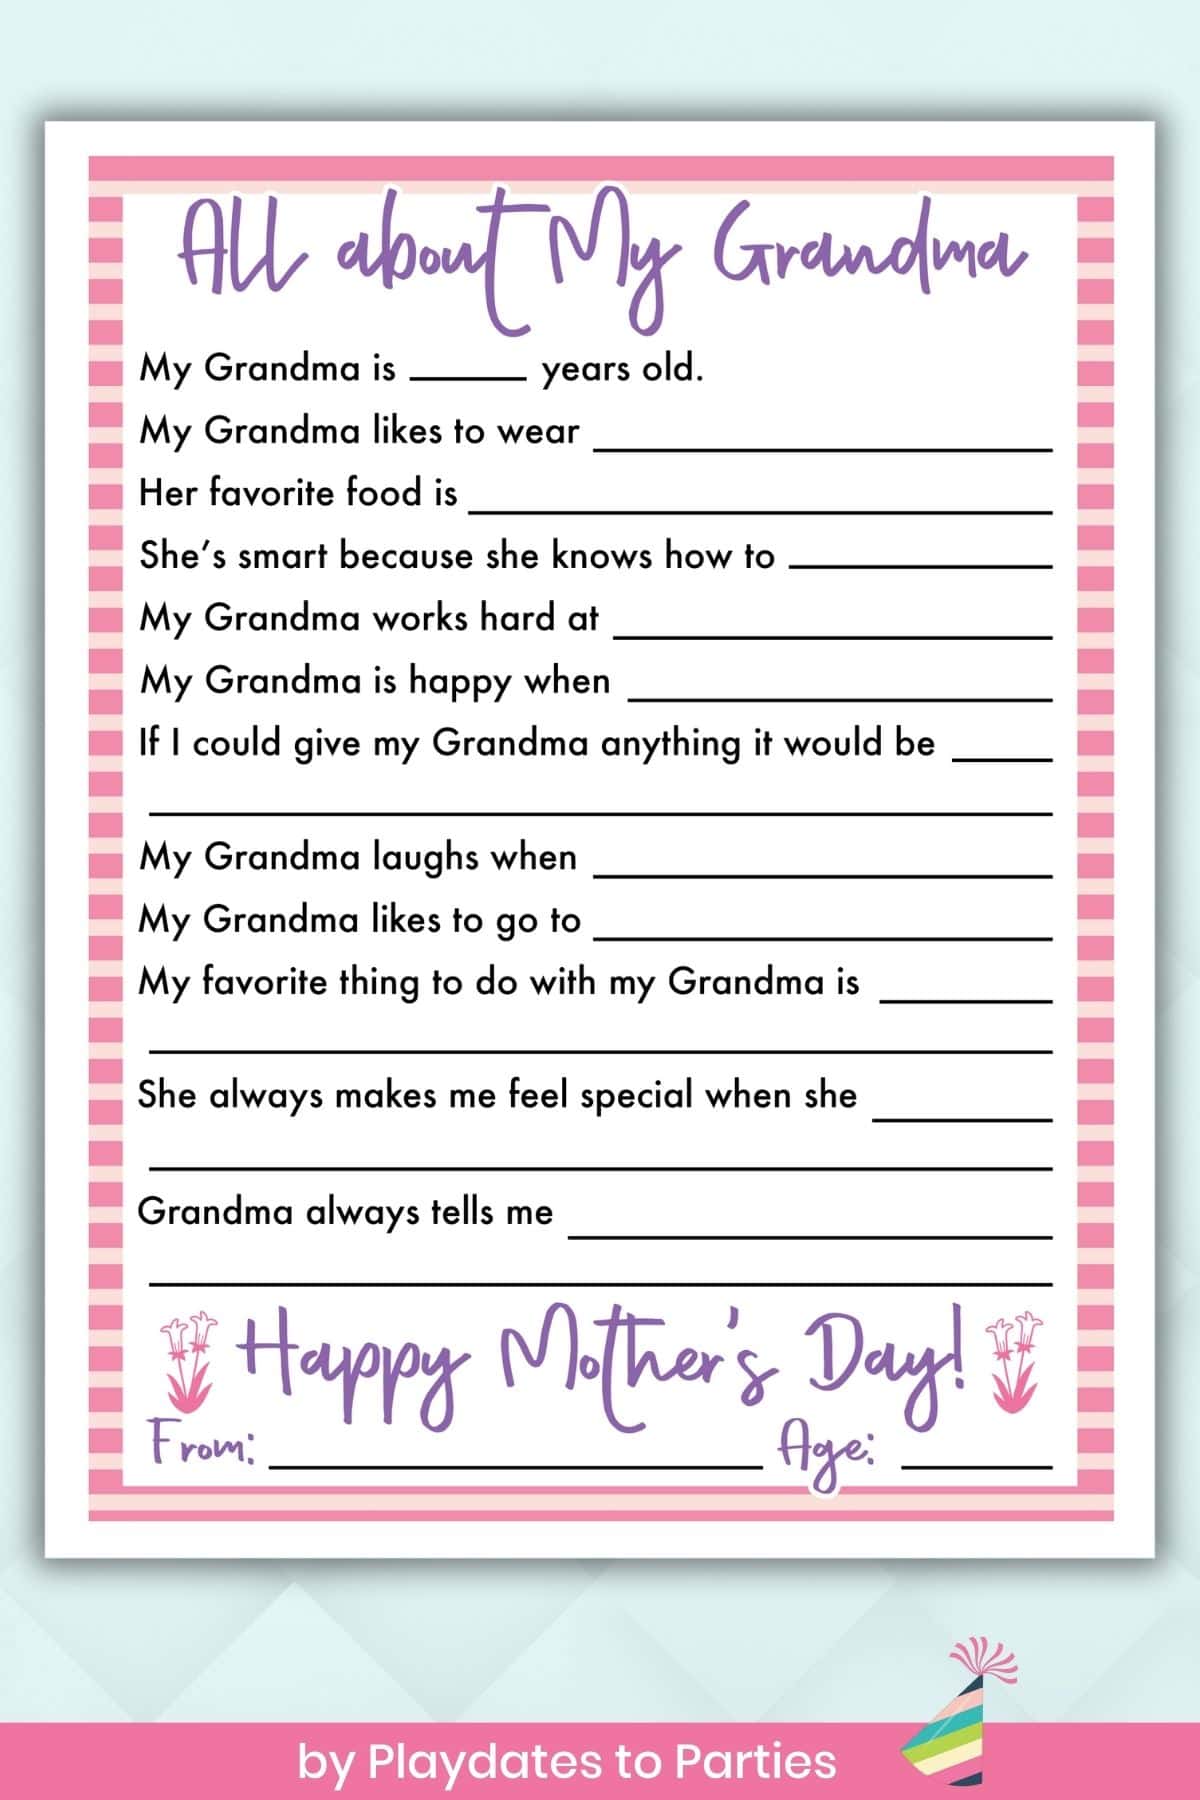 All about grandma questionnaire.